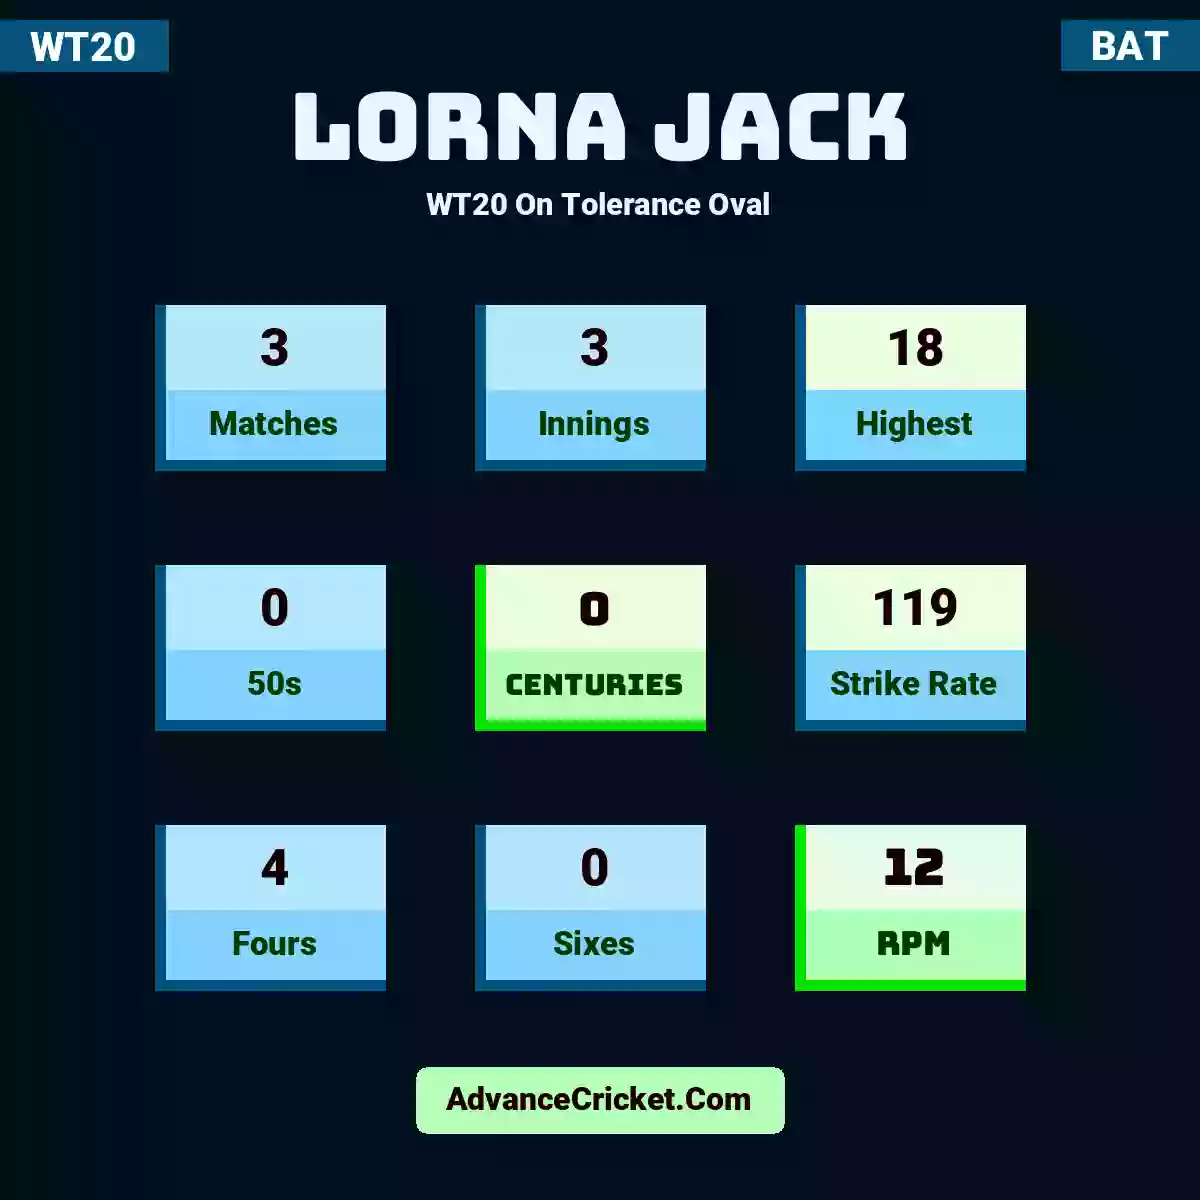 Lorna Jack WT20  On Tolerance Oval, Lorna Jack played 3 matches, scored 18 runs as highest, 0 half-centuries, and 0 centuries, with a strike rate of 119. L.Jack hit 4 fours and 0 sixes, with an RPM of 12.